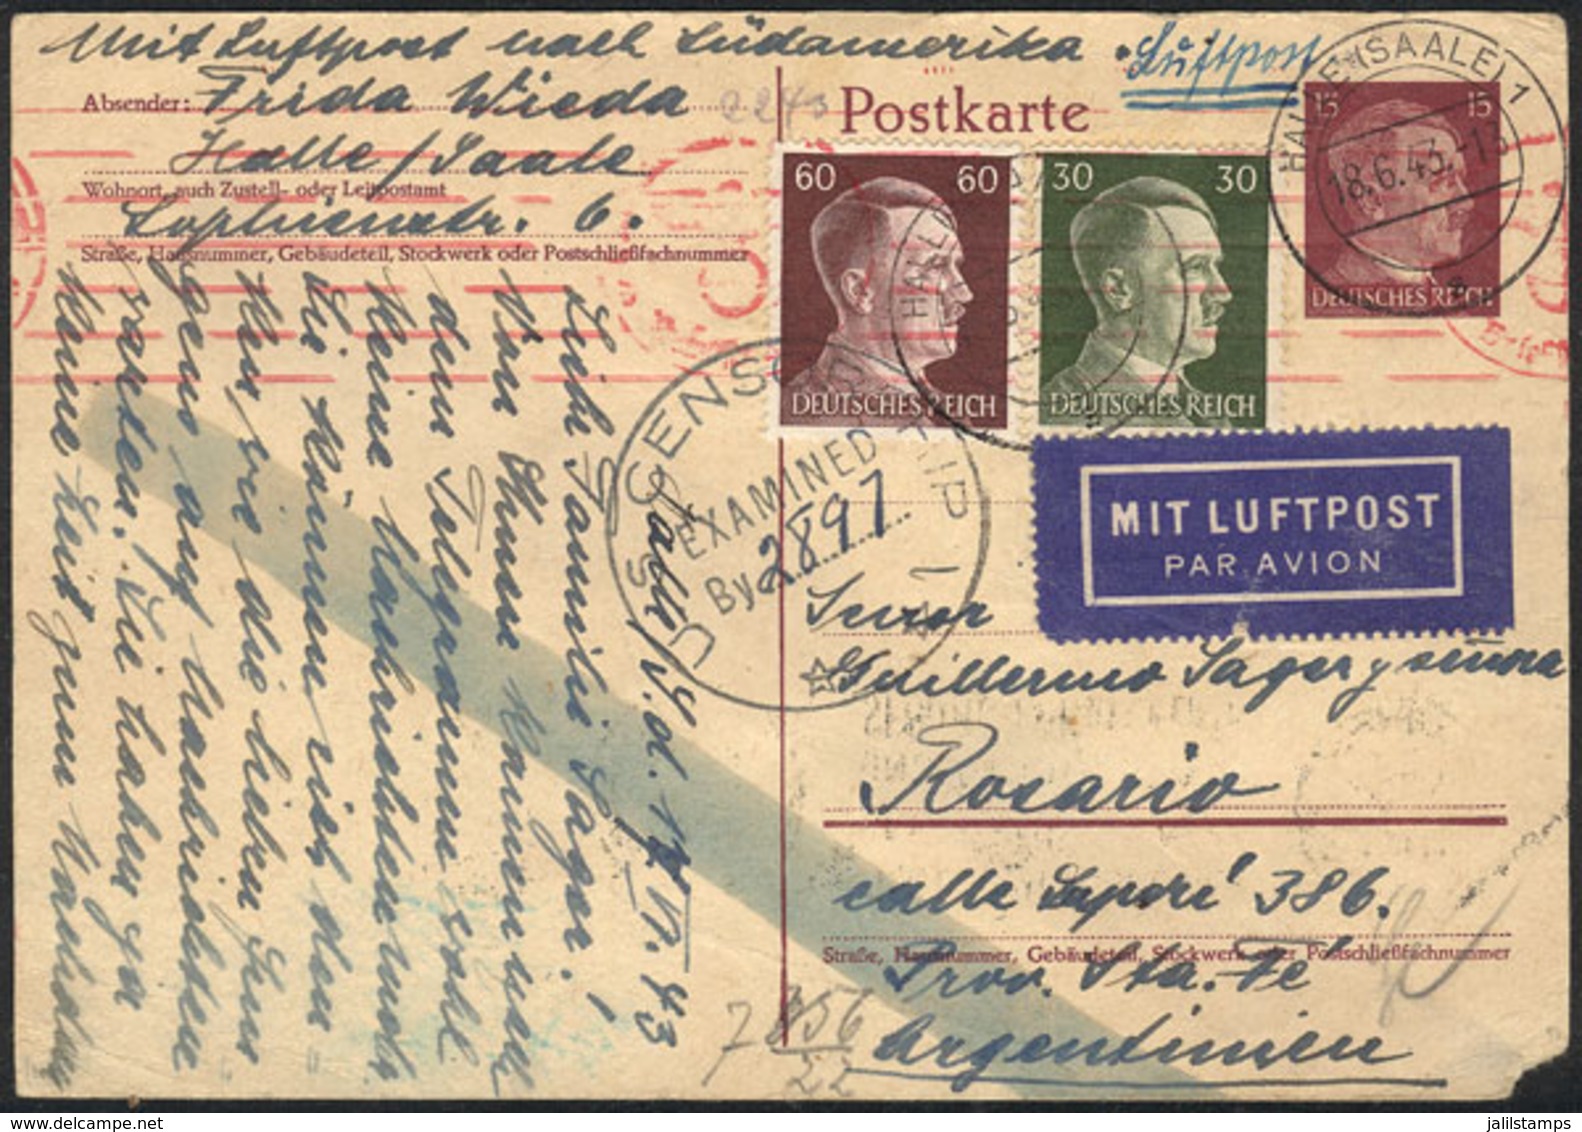 GERMANY: Postal Card (Hitler 15Pf.) + Hitler Stamps Of 30 And 60Pf. (total 1.05Mk.) Sent By Airmail From Halle To Argent - Covers & Documents